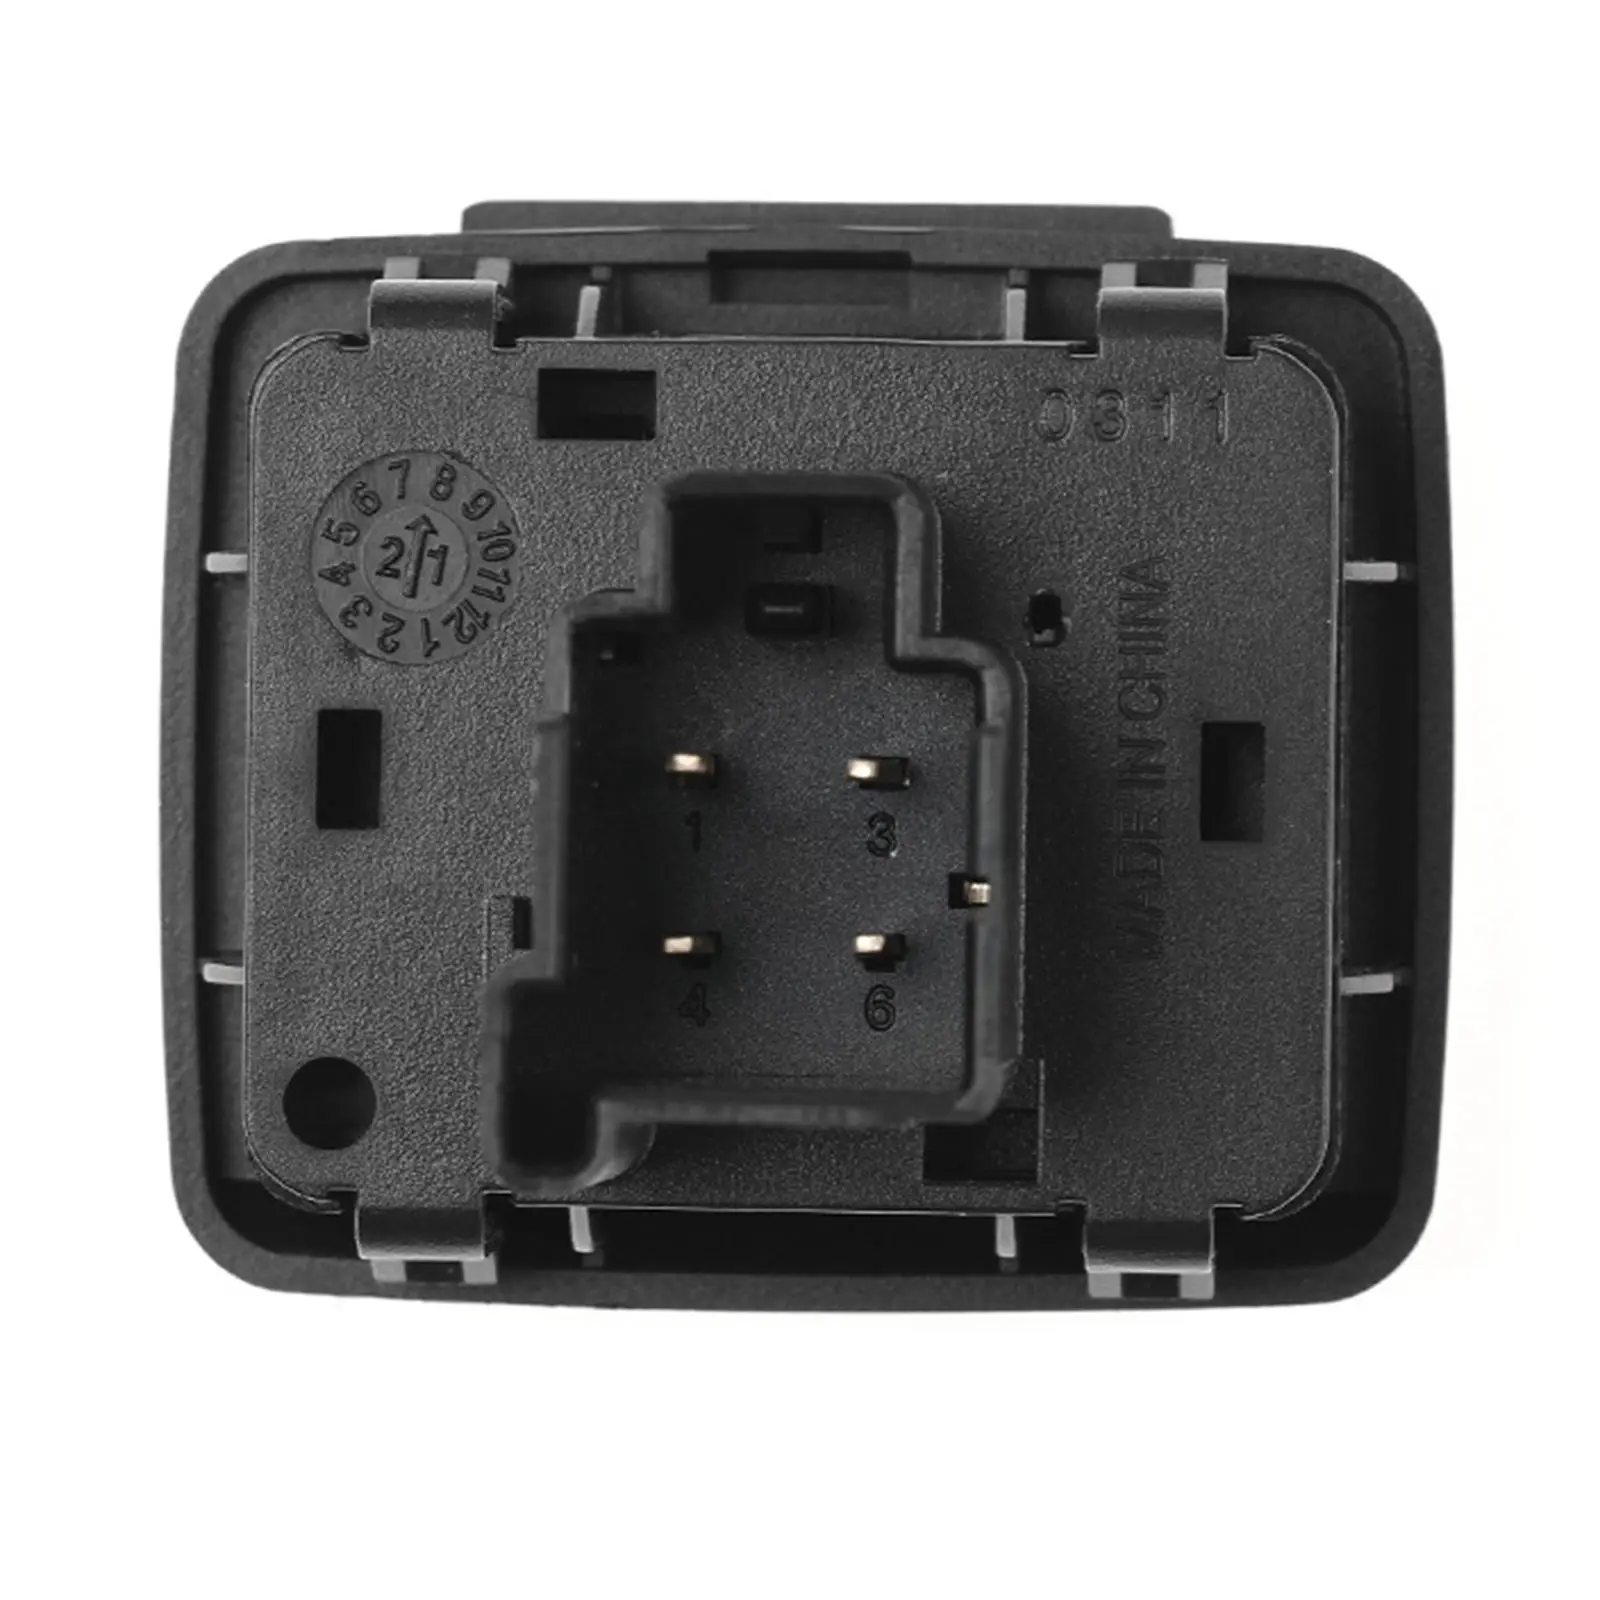 New AC110Volt Power USB Outlet Socket Replacement Assembly for Lincoln/F 150 2011-2014 Center Console BC3Z-19N236-A